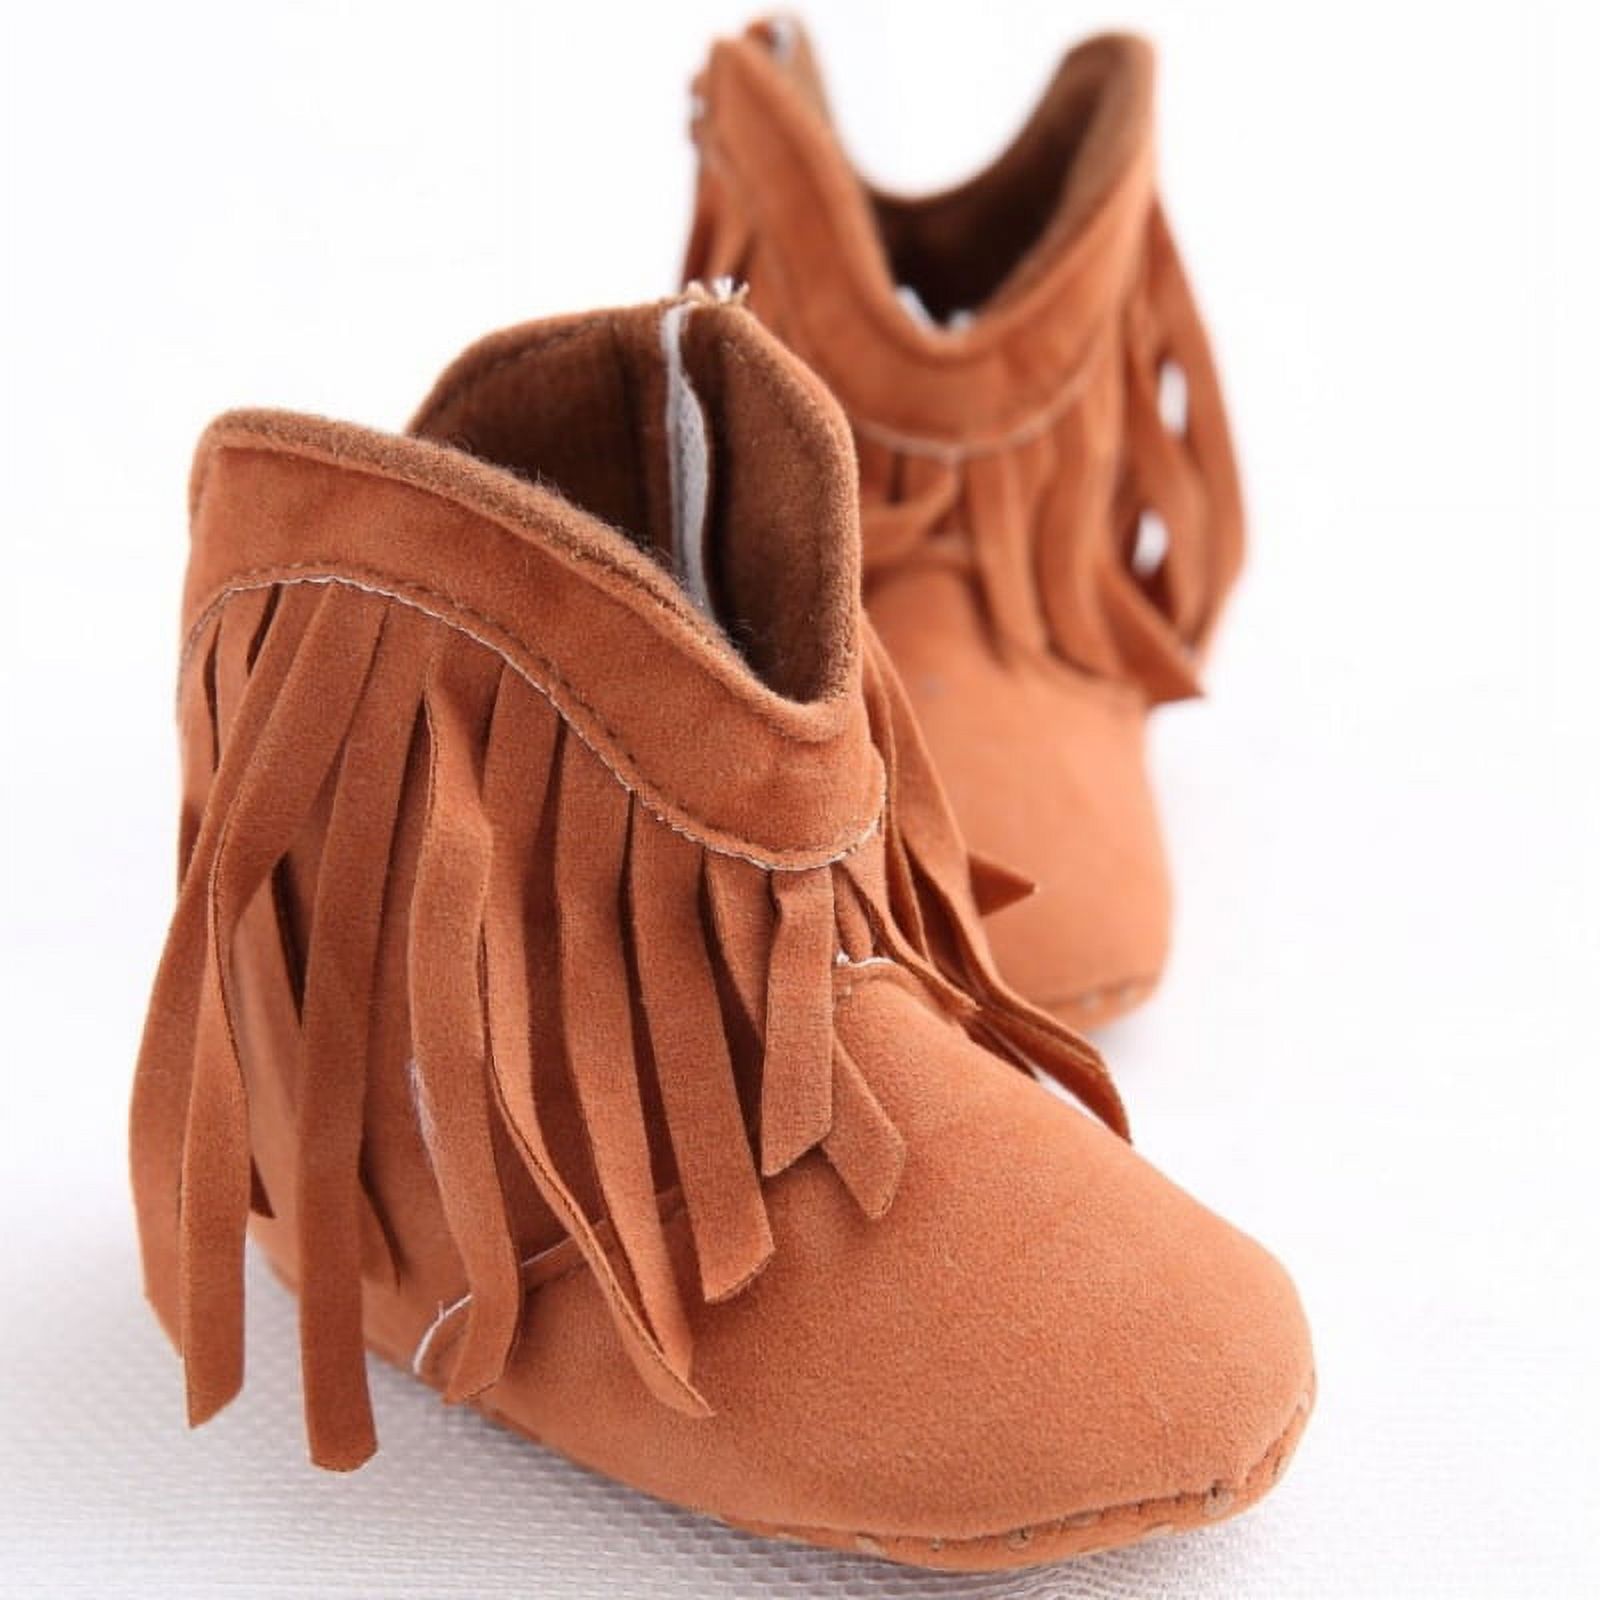 Fymall Infant Toddler Tassel Boots Baby Boy Girl Soft Soled Winter Shoes - image 2 of 5